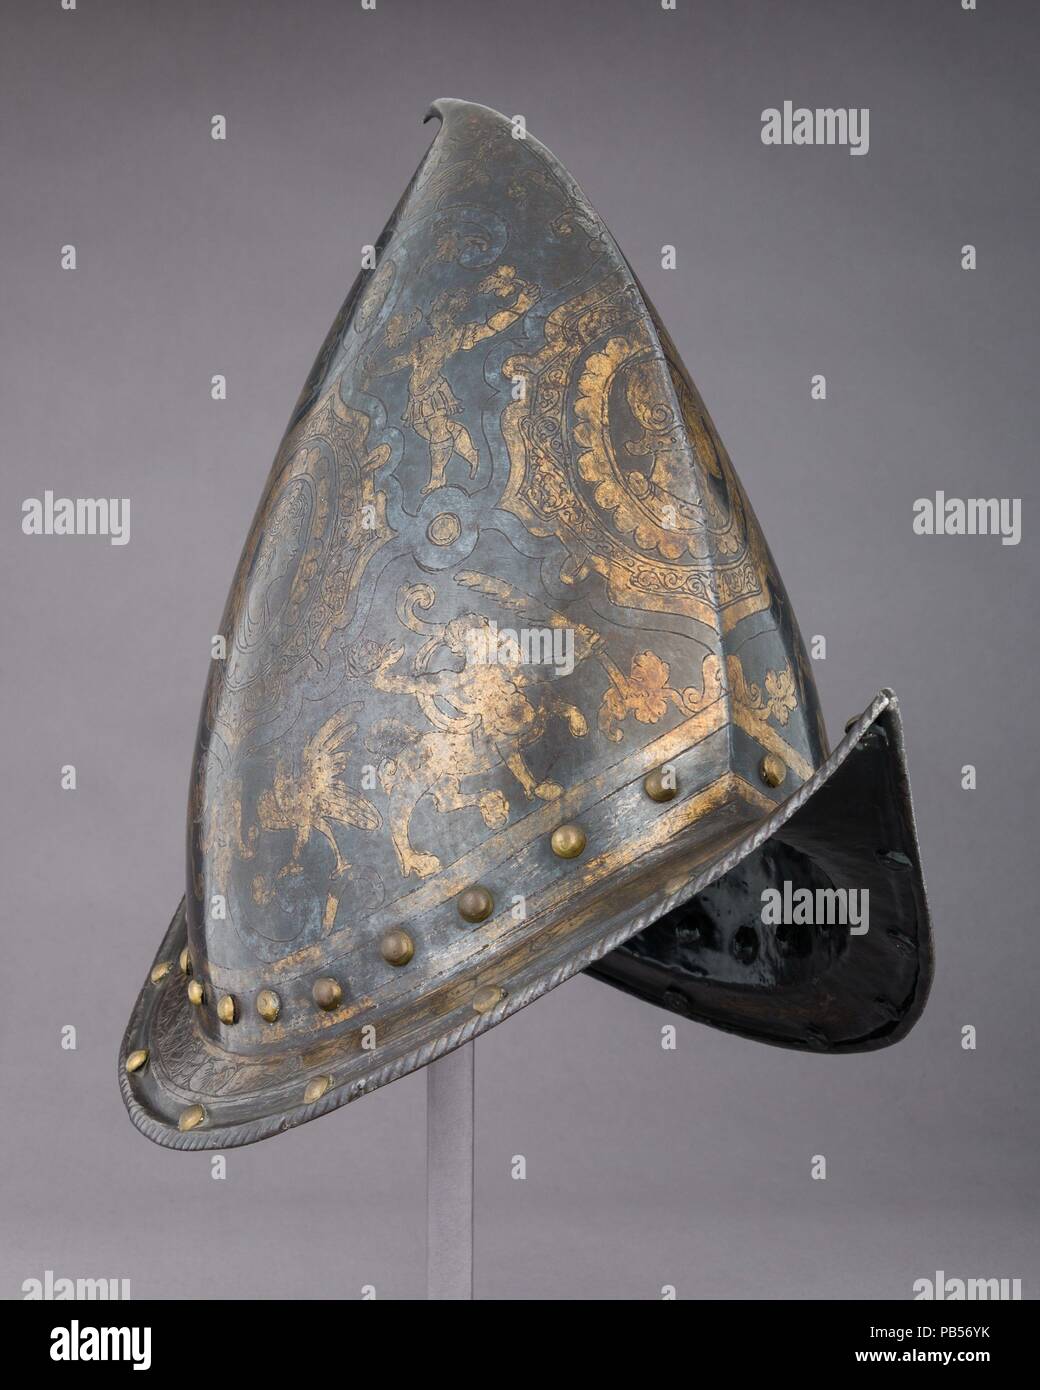 Morion-Cabasset. Culture: Italian. Dimensions: H. 12 in. (30.5 cm); W. 8 7/8 in. (22.5 cm); D. 13 7/8 in. (35.2 cm); Wt. 3 lb. 7.2 oz. (1564.9 g). Date: ca. 1585. Museum: Metropolitan Museum of Art, New York, USA. Stock Photo